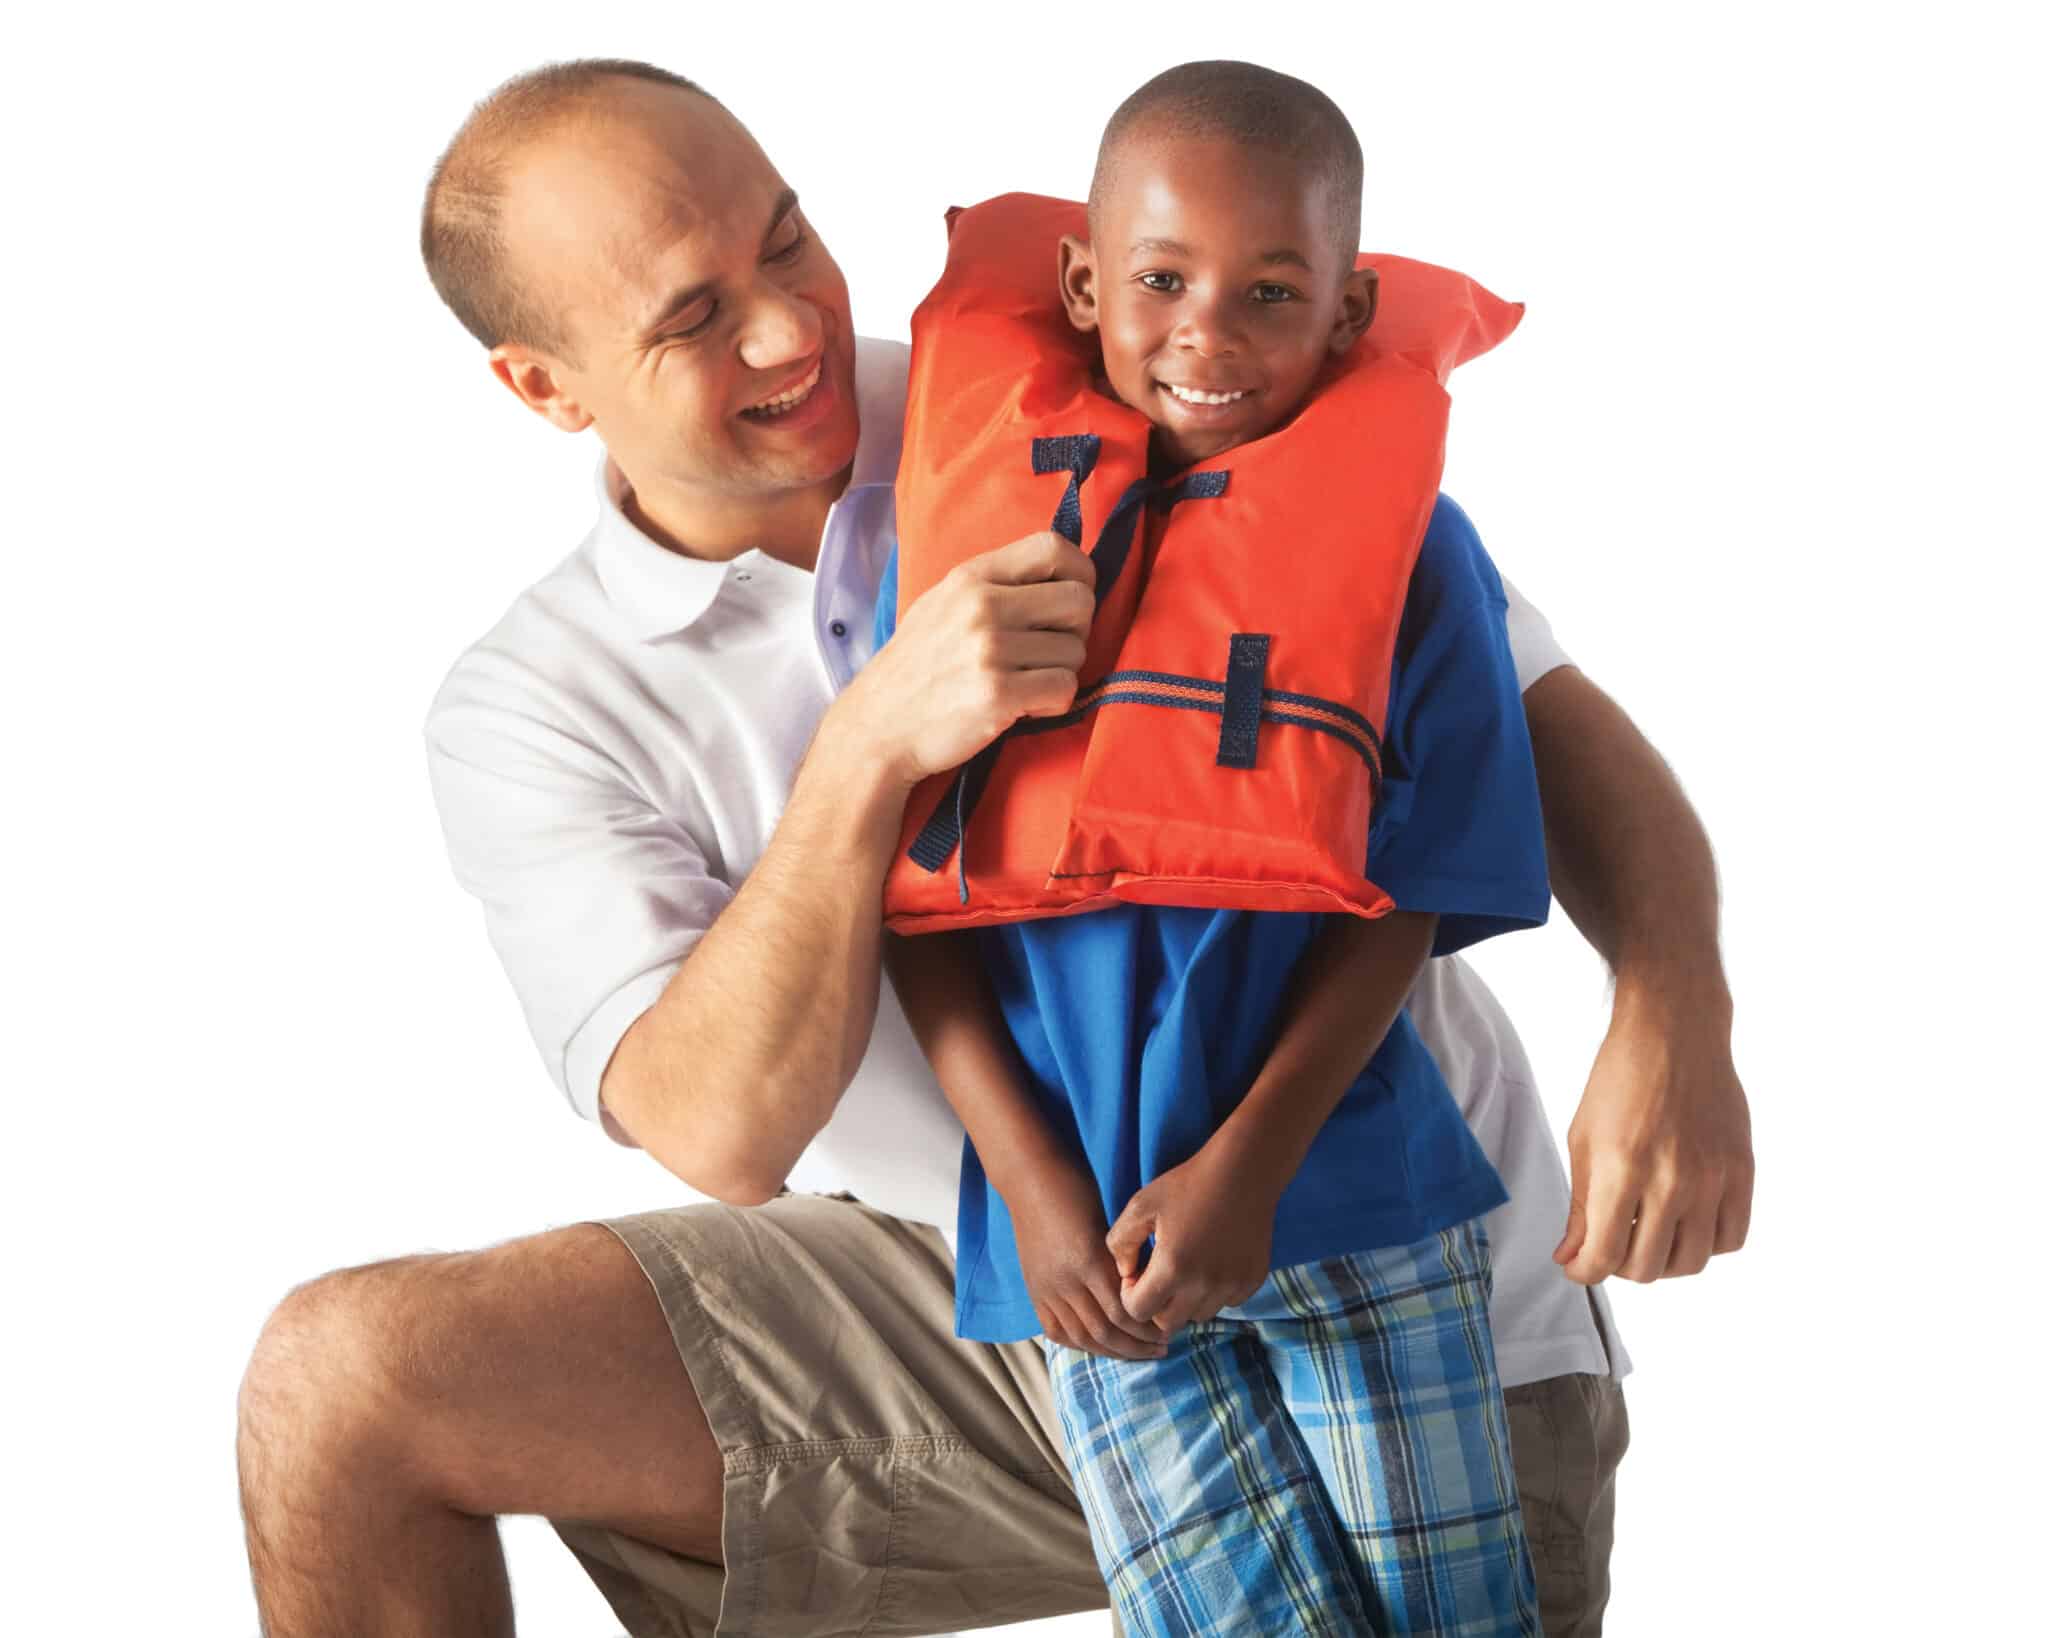 YMCA instructor teaching water safety to young boy..